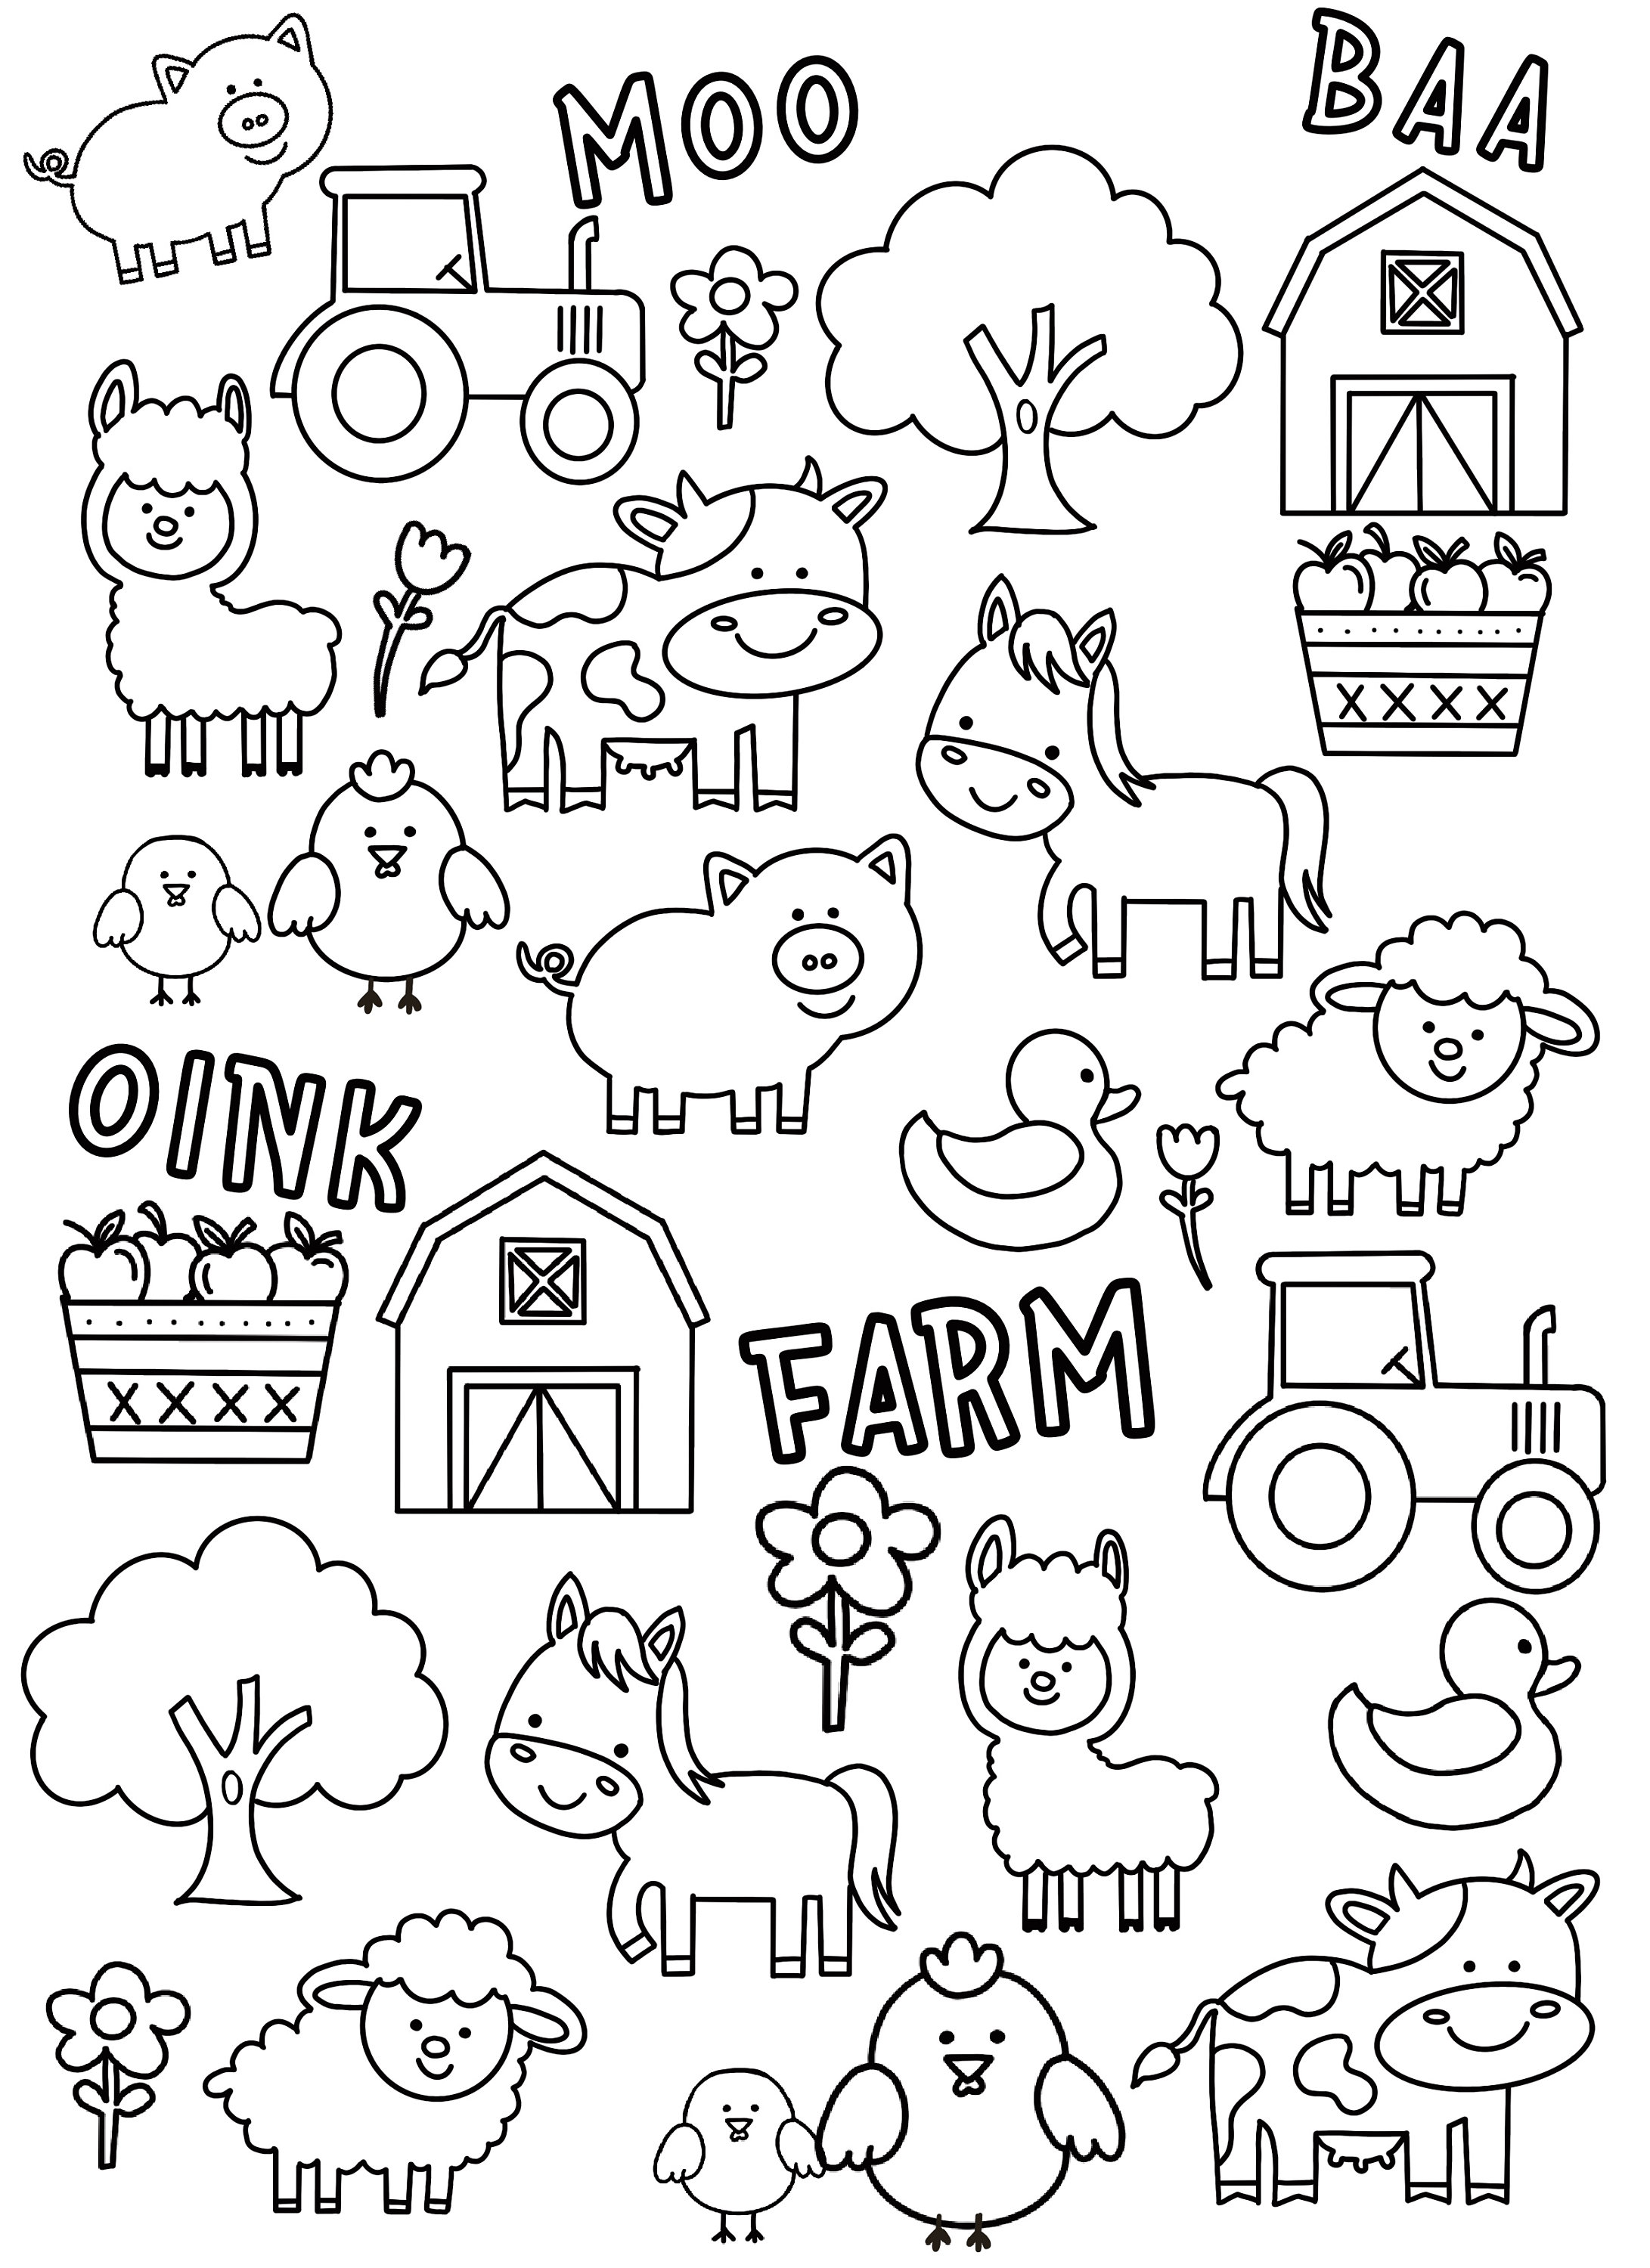 Farm animals coloring page animals coloring page coloring pagescolouring page kids learning activities kids farm art coloring page